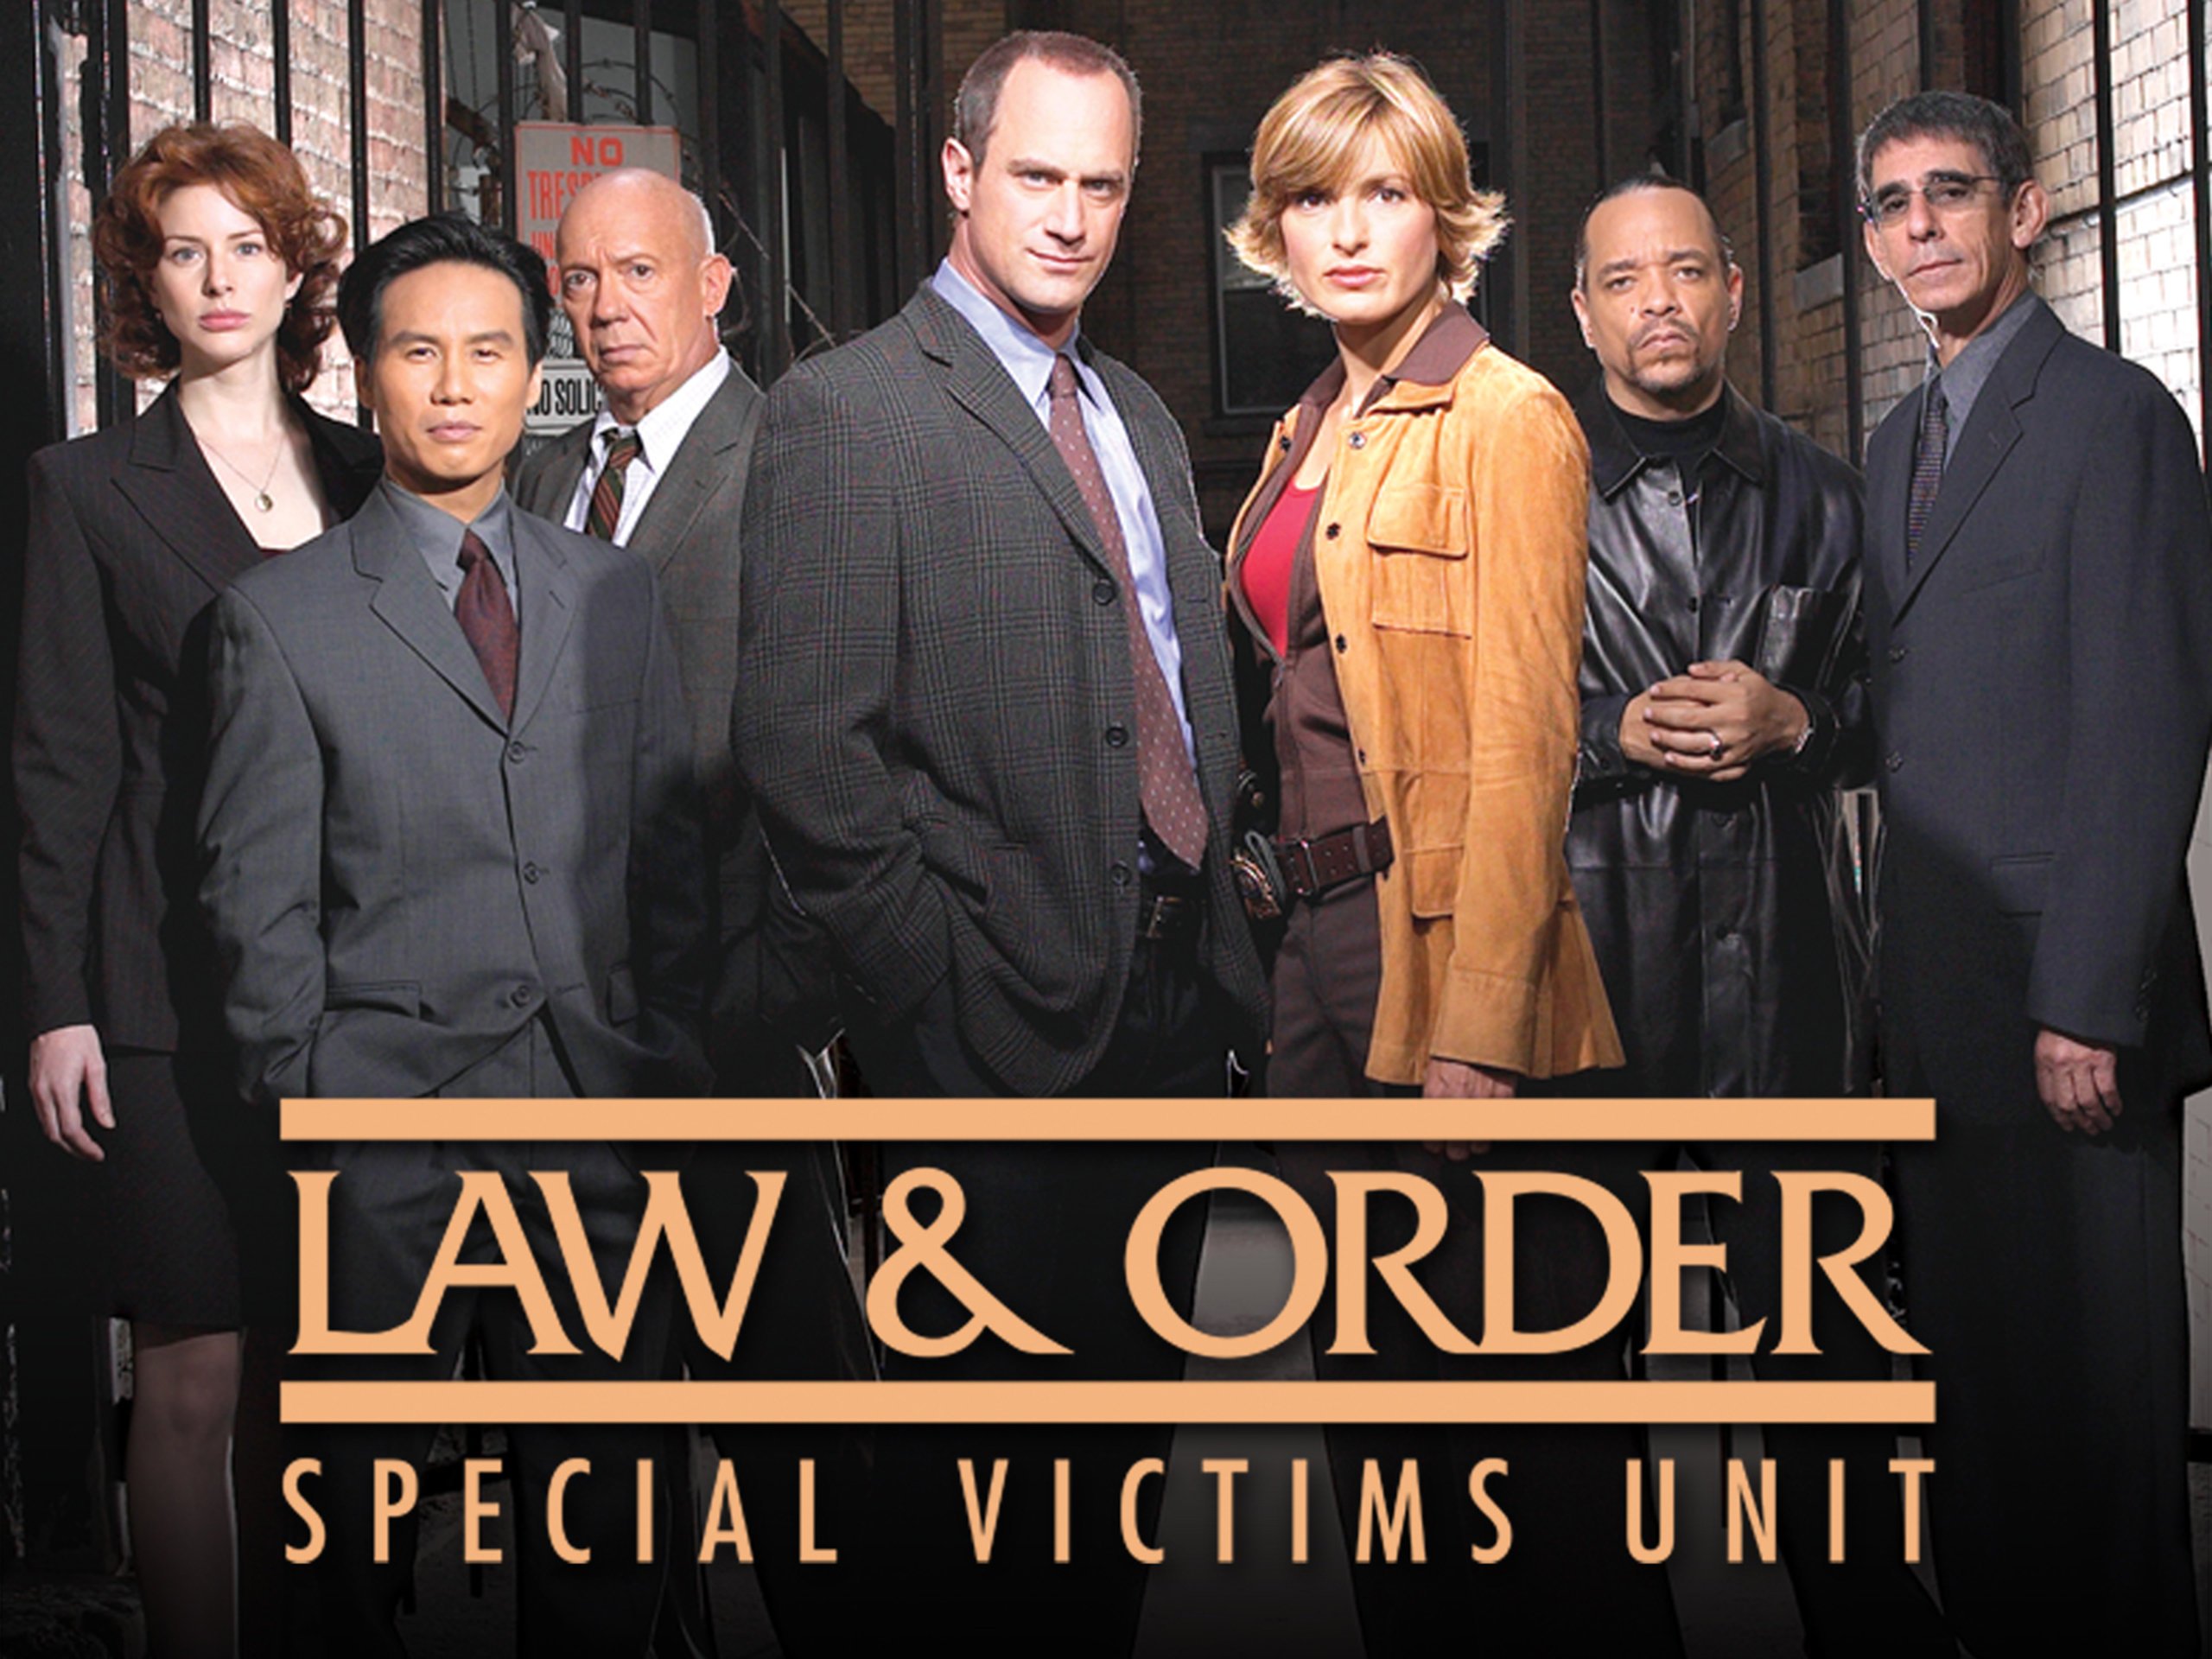 Law & Order Special Victims Unit